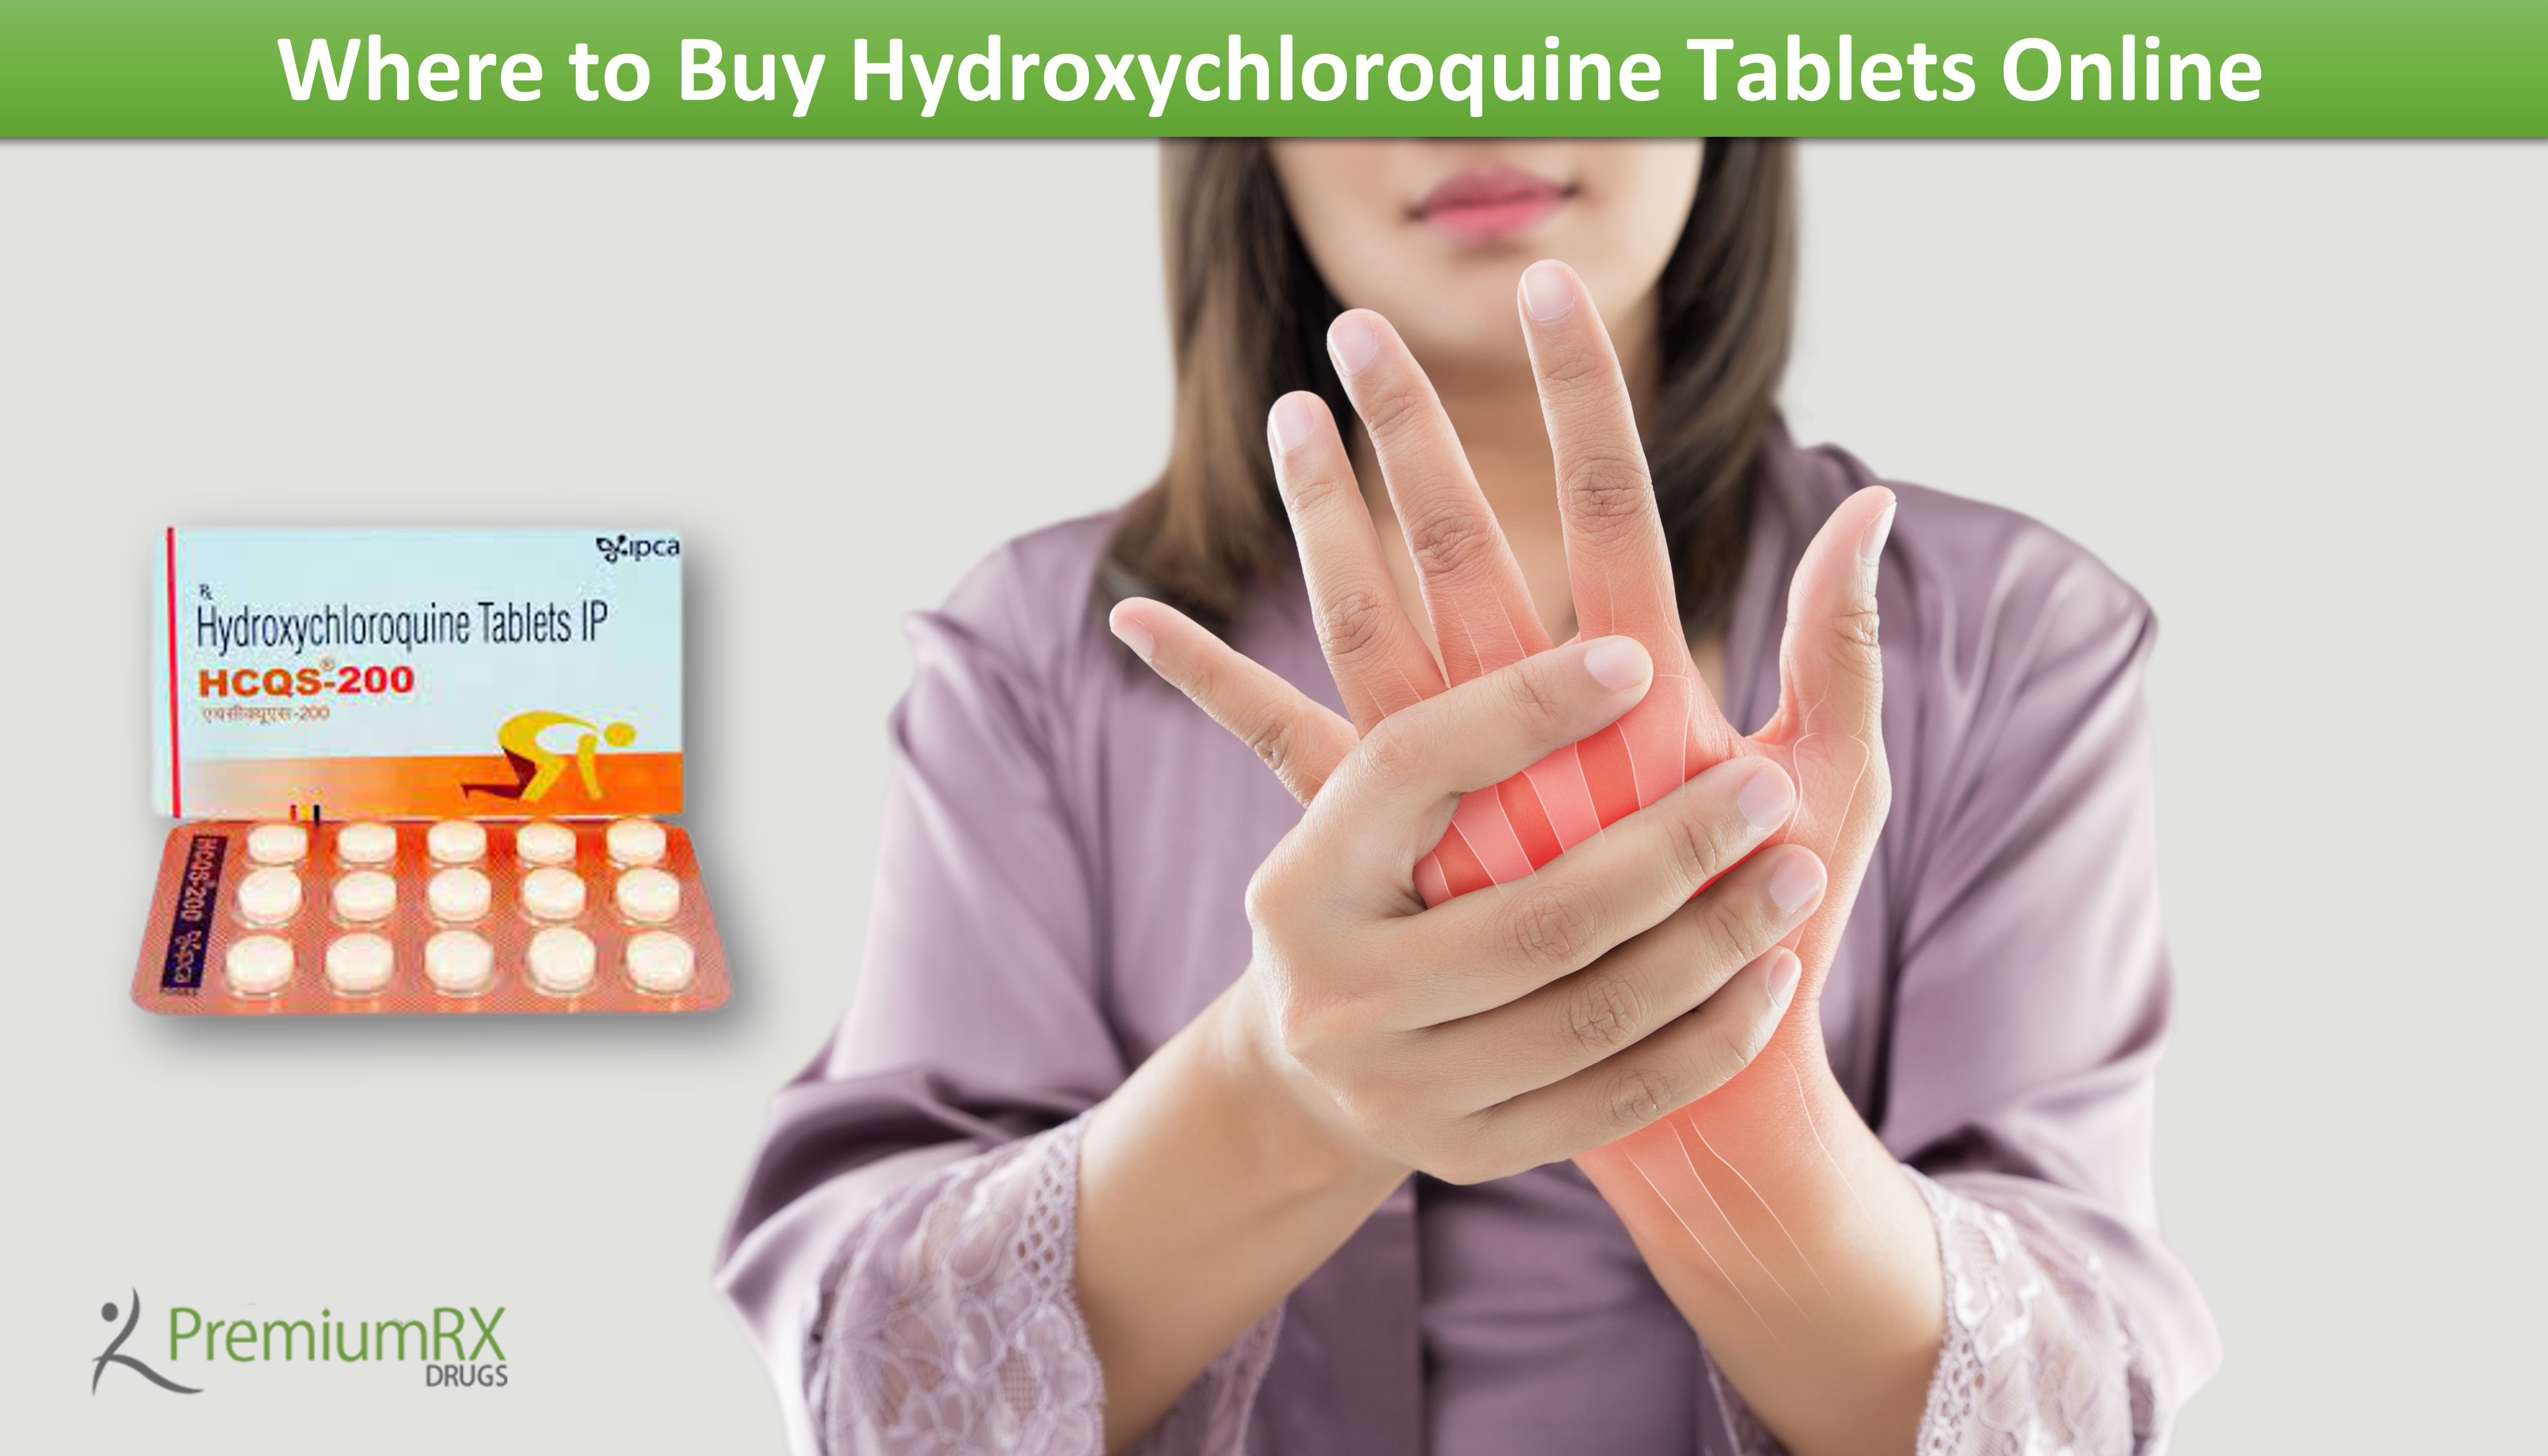 Where to Buy Hydroxychloroquine Tablets Online